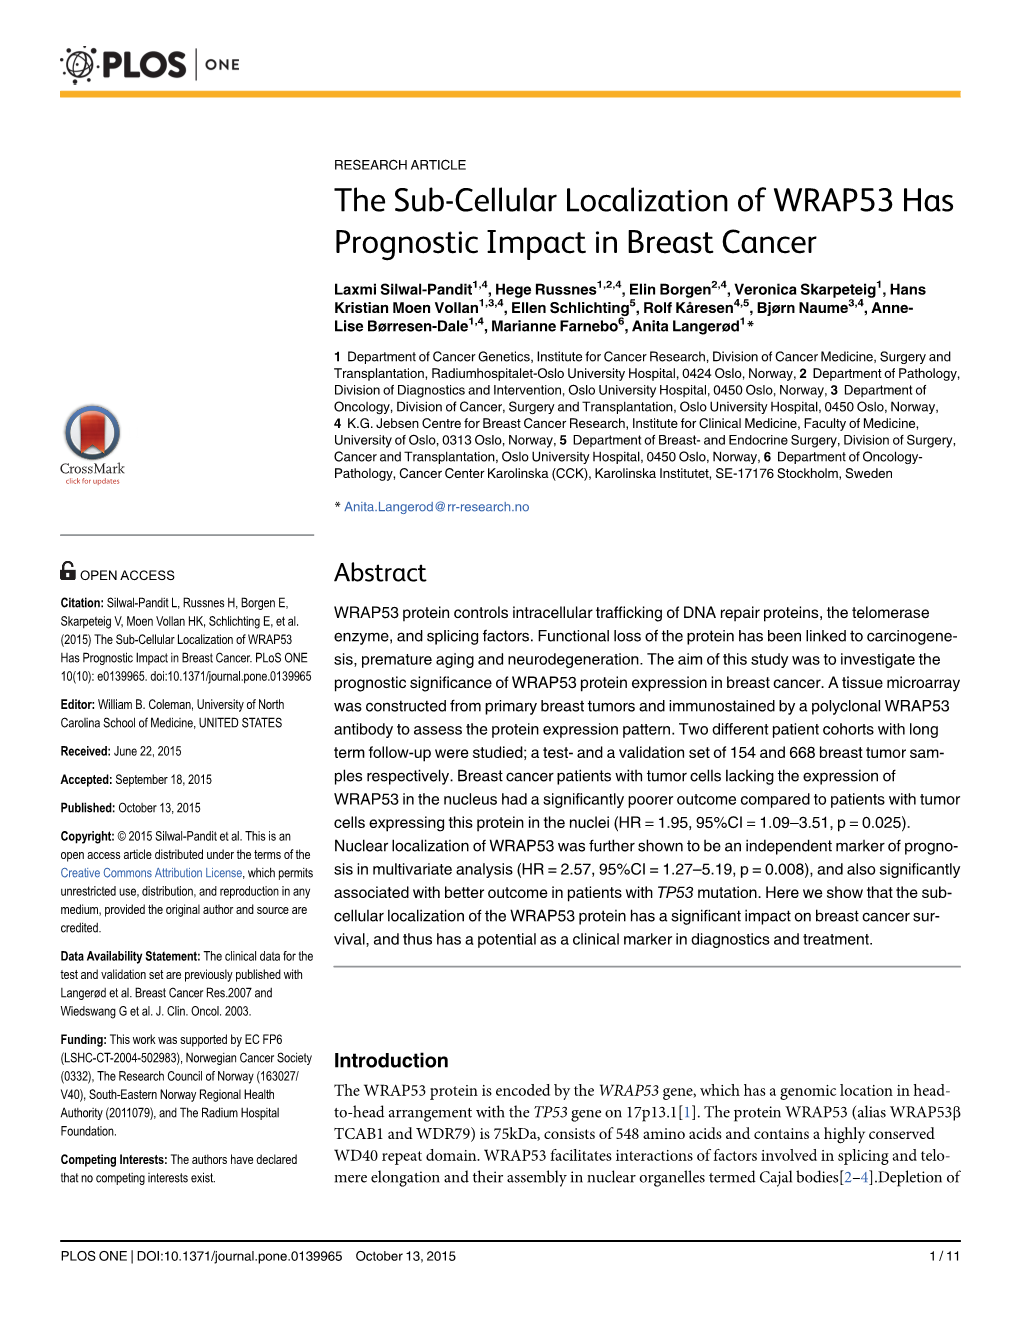 The Sub-Cellular Localization of WRAP53 Has Prognostic Impact in Breast Cancer